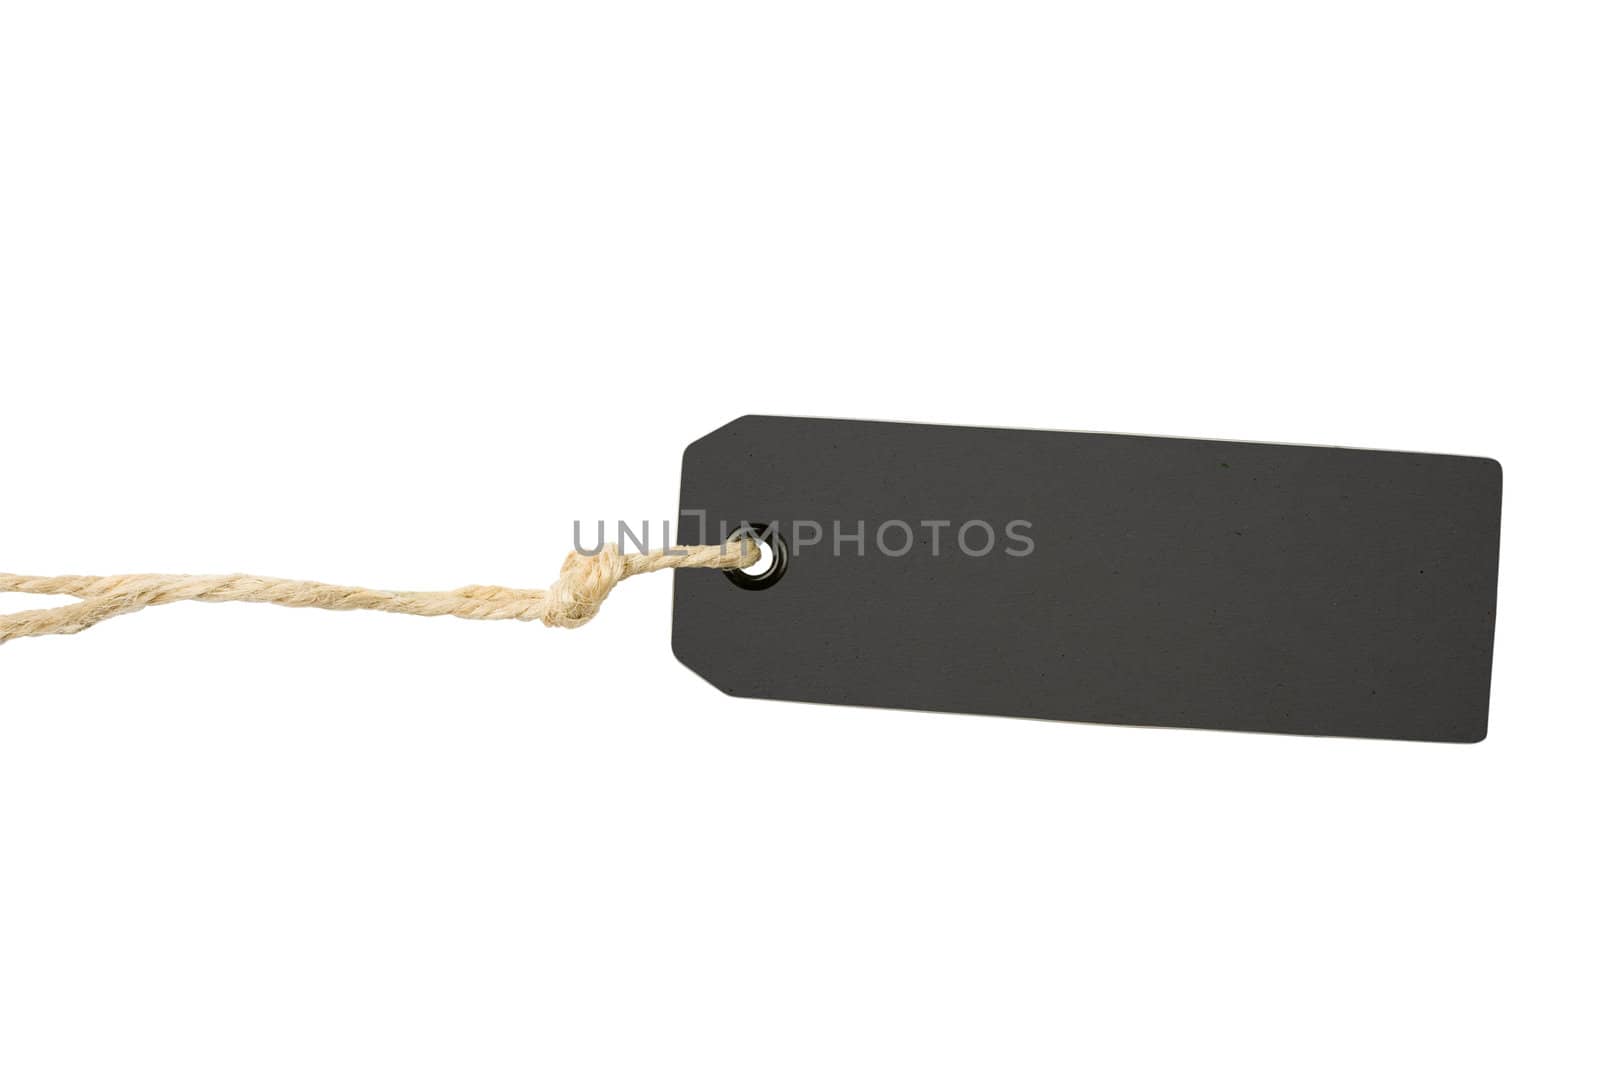 Blank black product info label isolated on white background with clipping path